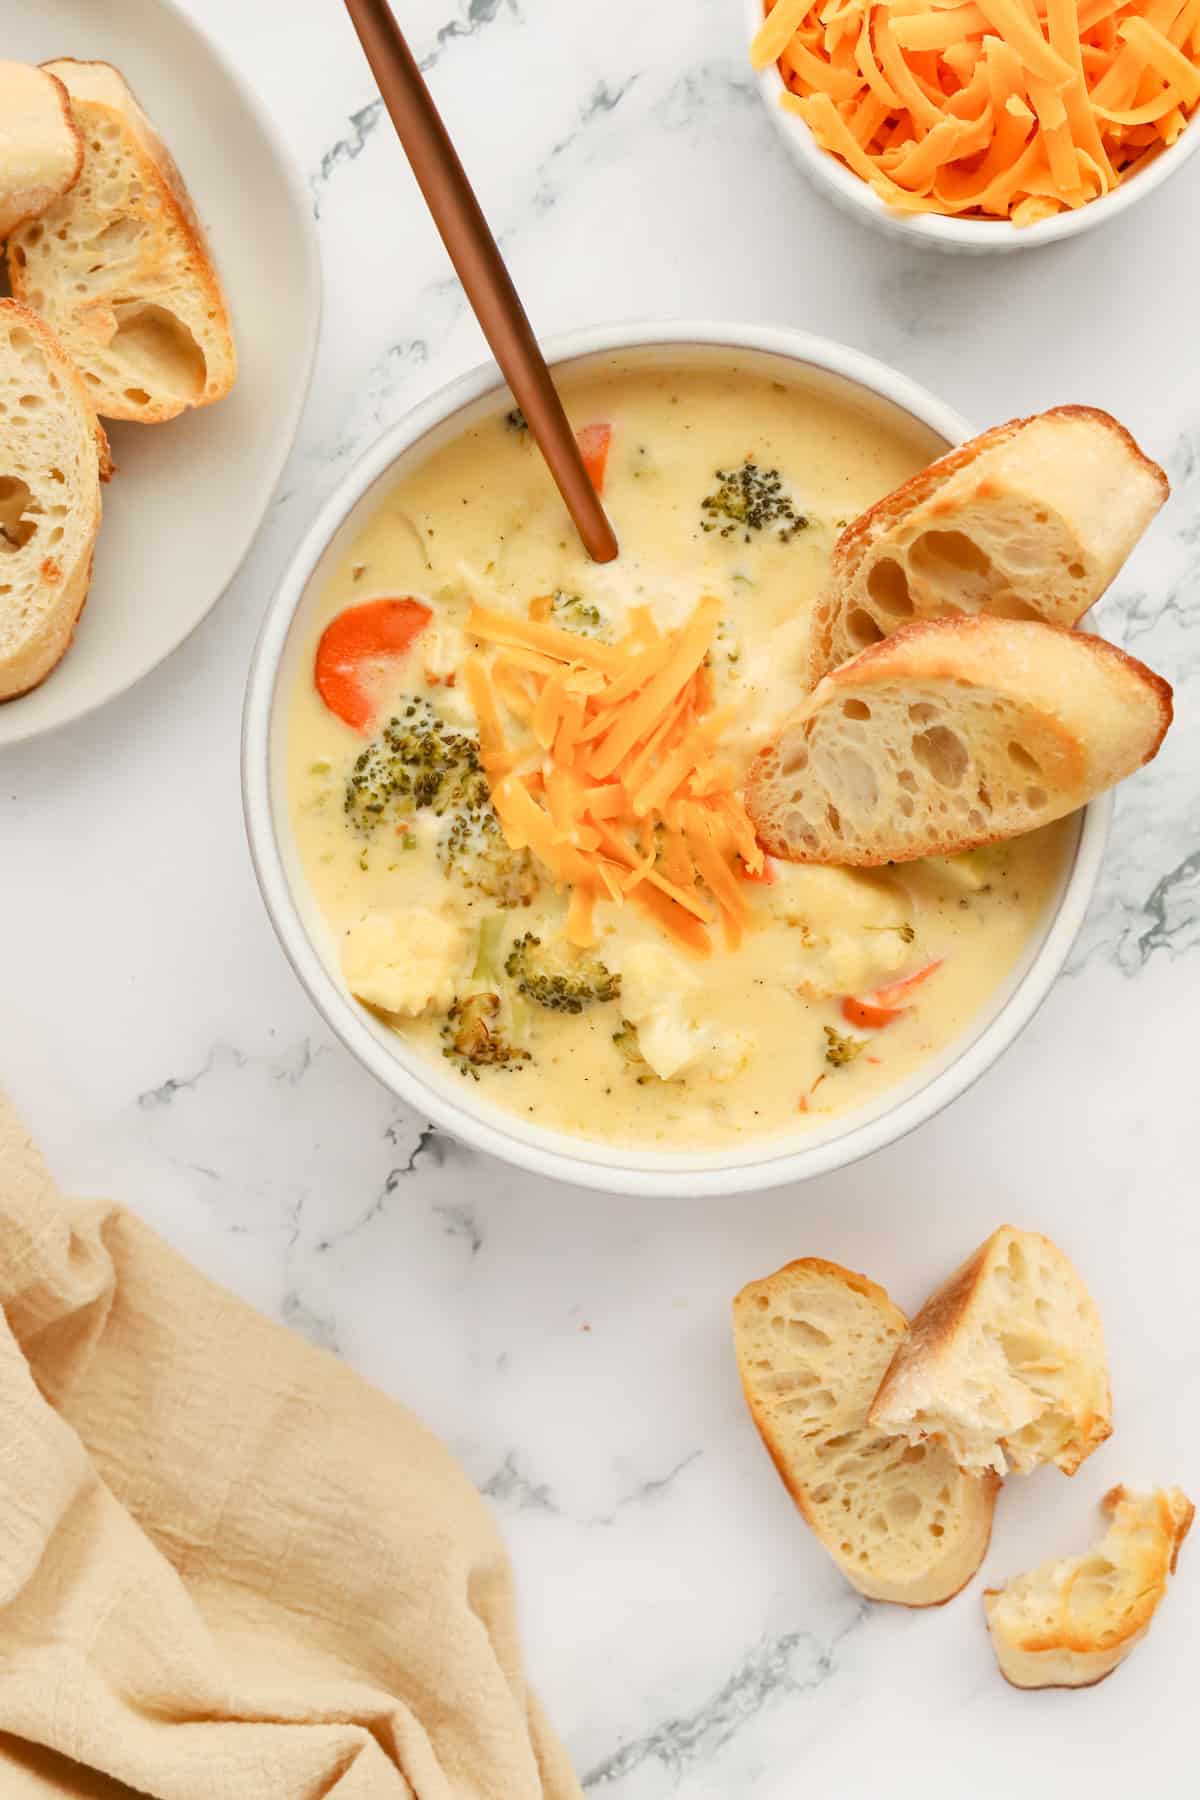 White bowl of soup with 2 pieces of baguette sitting on the side. A white bowl of cheese is on the top right, a plate of toasted baguette on the left and chunks of baguette on the countertop in the bottom right.